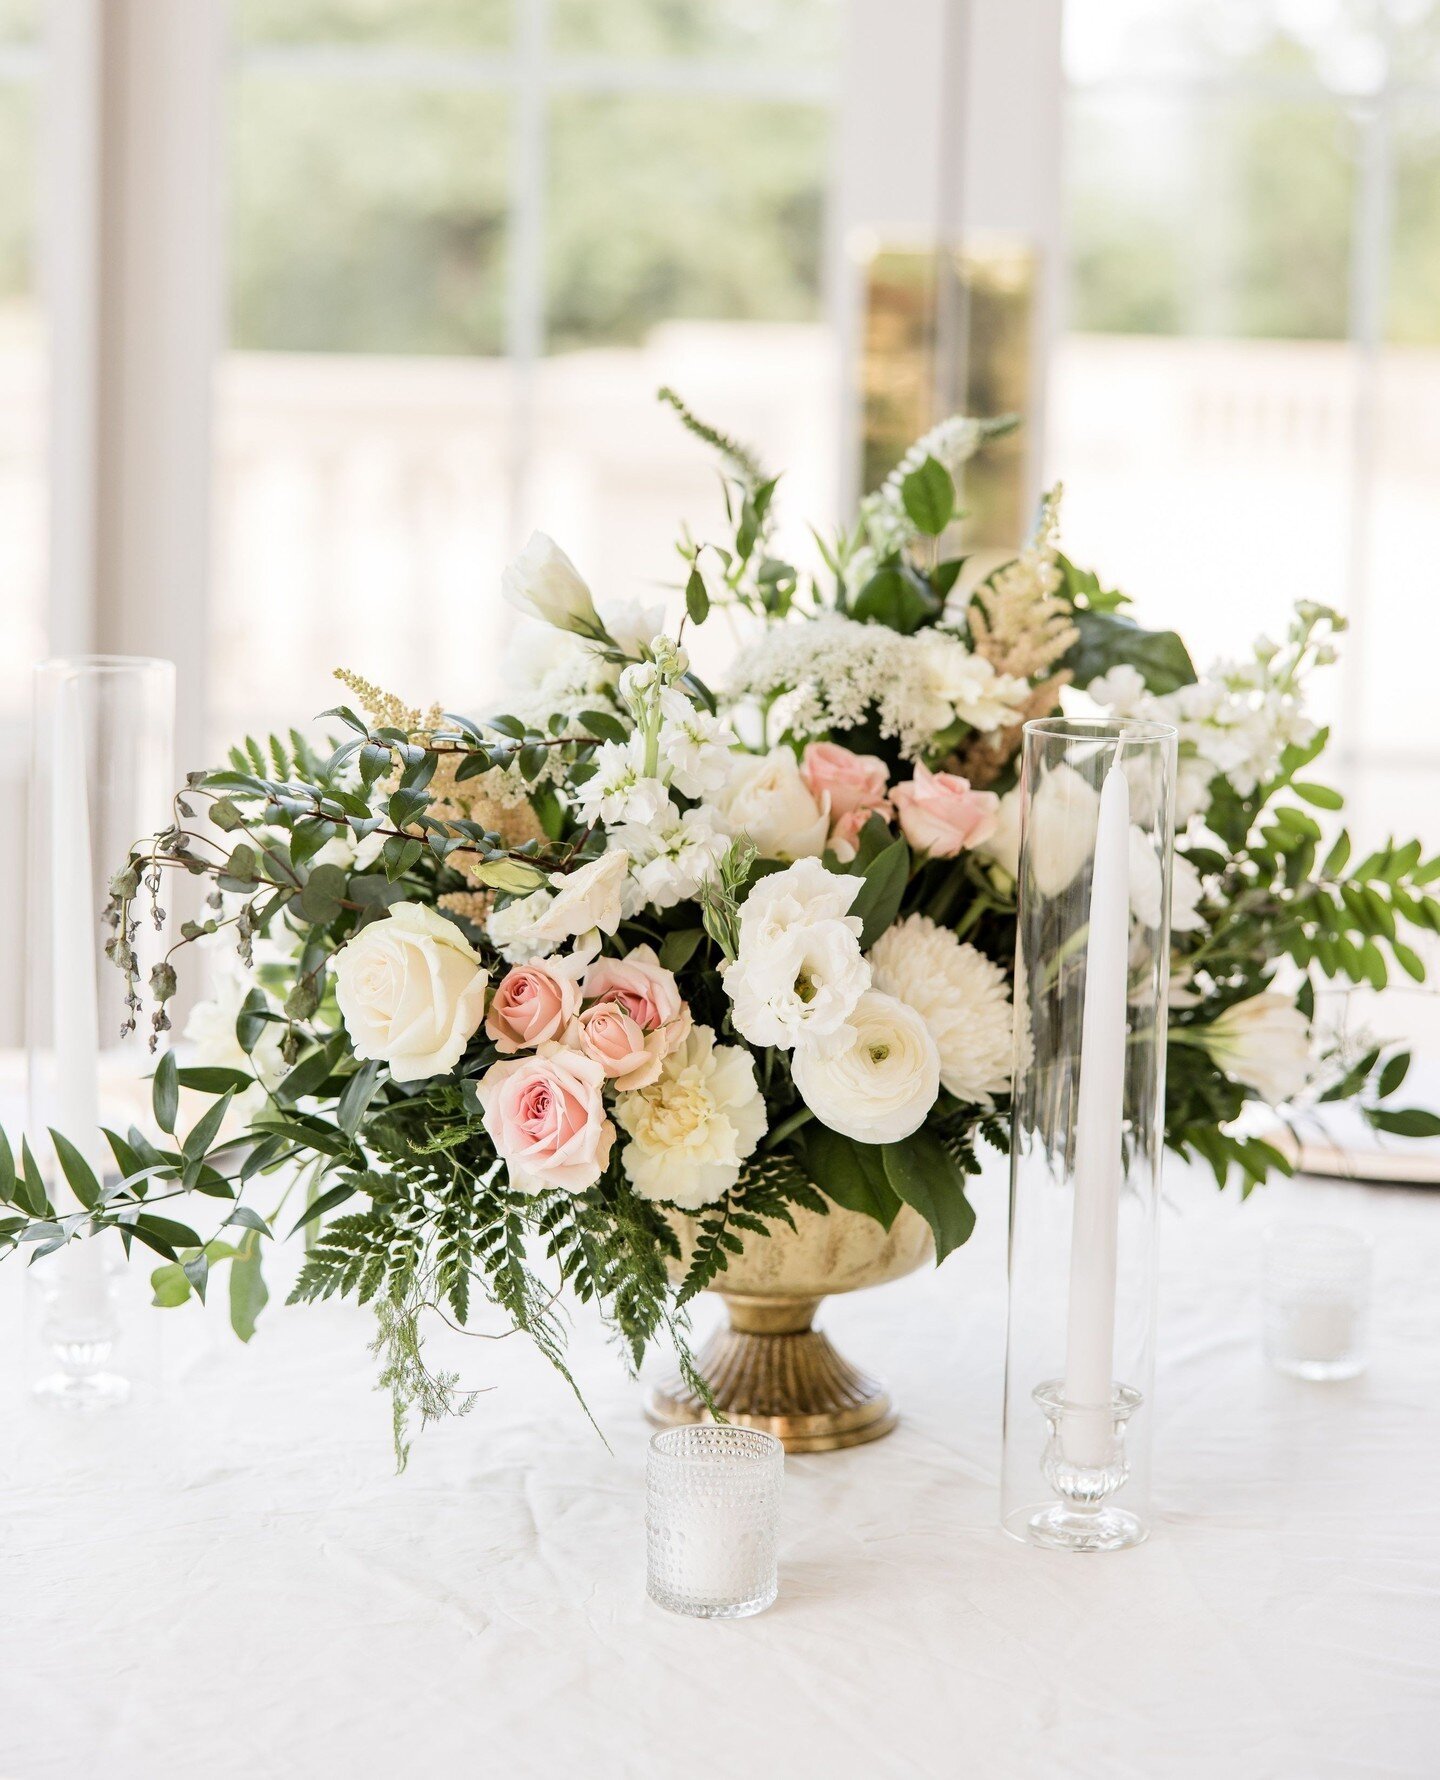 Excitement is in full bloom for the vibrant palettes and fresh blossoms that come with the season.⁠
⁠
Bring on the springtime hues!! ⁠
⁠
Venue @theolanatx⁠
Photography @emilychappellproductions ⁠
⁠
#weddingflorist #weddingflowers #wedding #florist #f